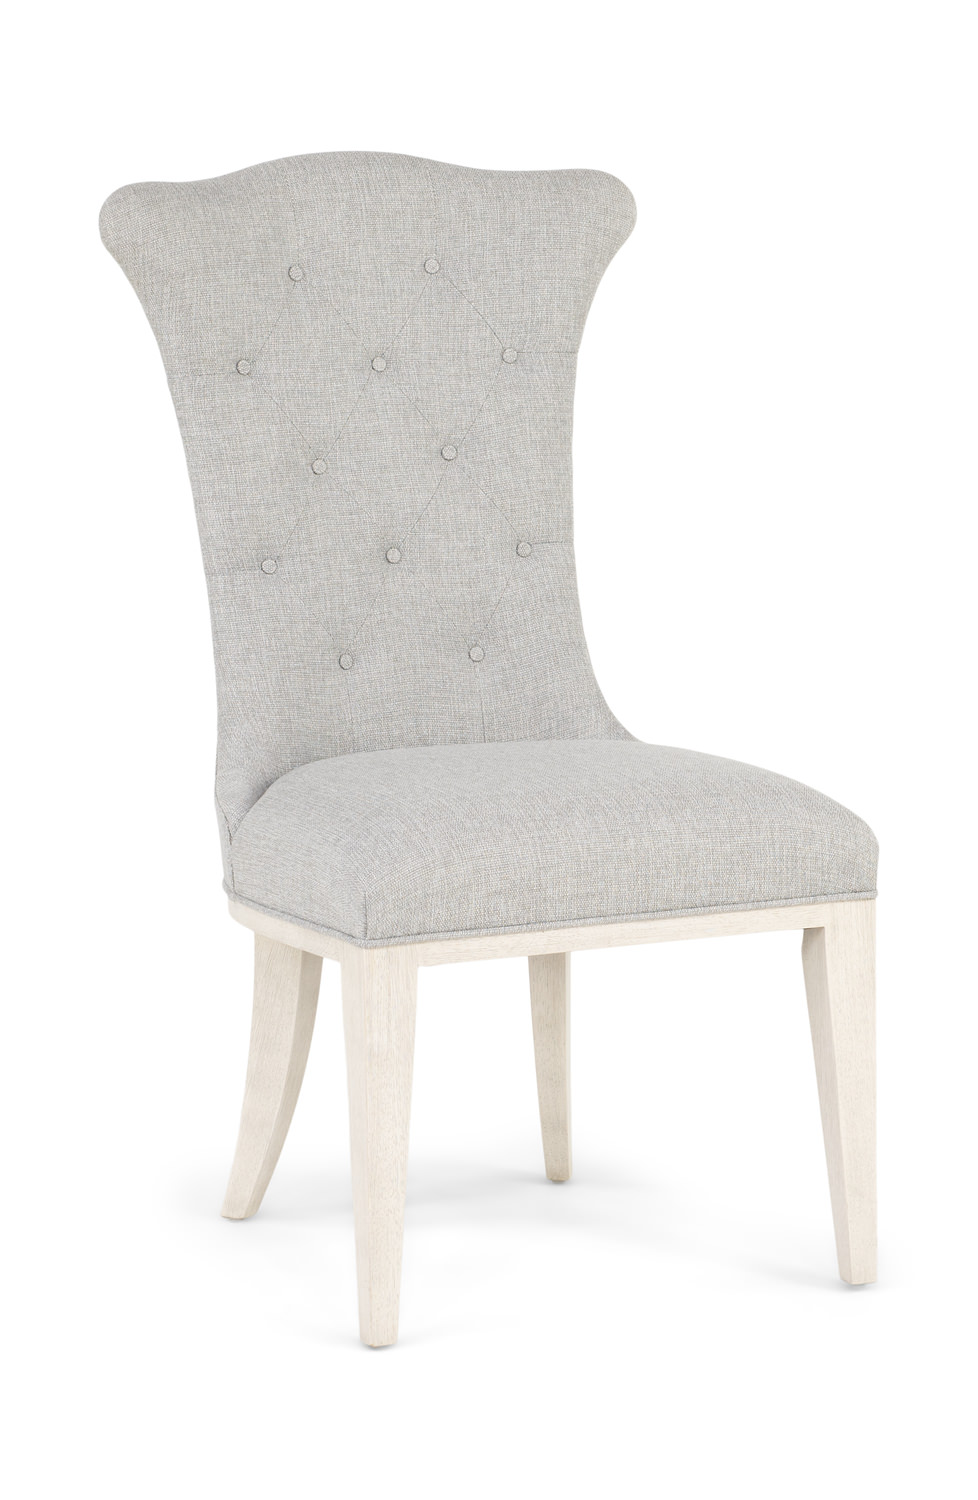 Allure Upholstered Arm Chair